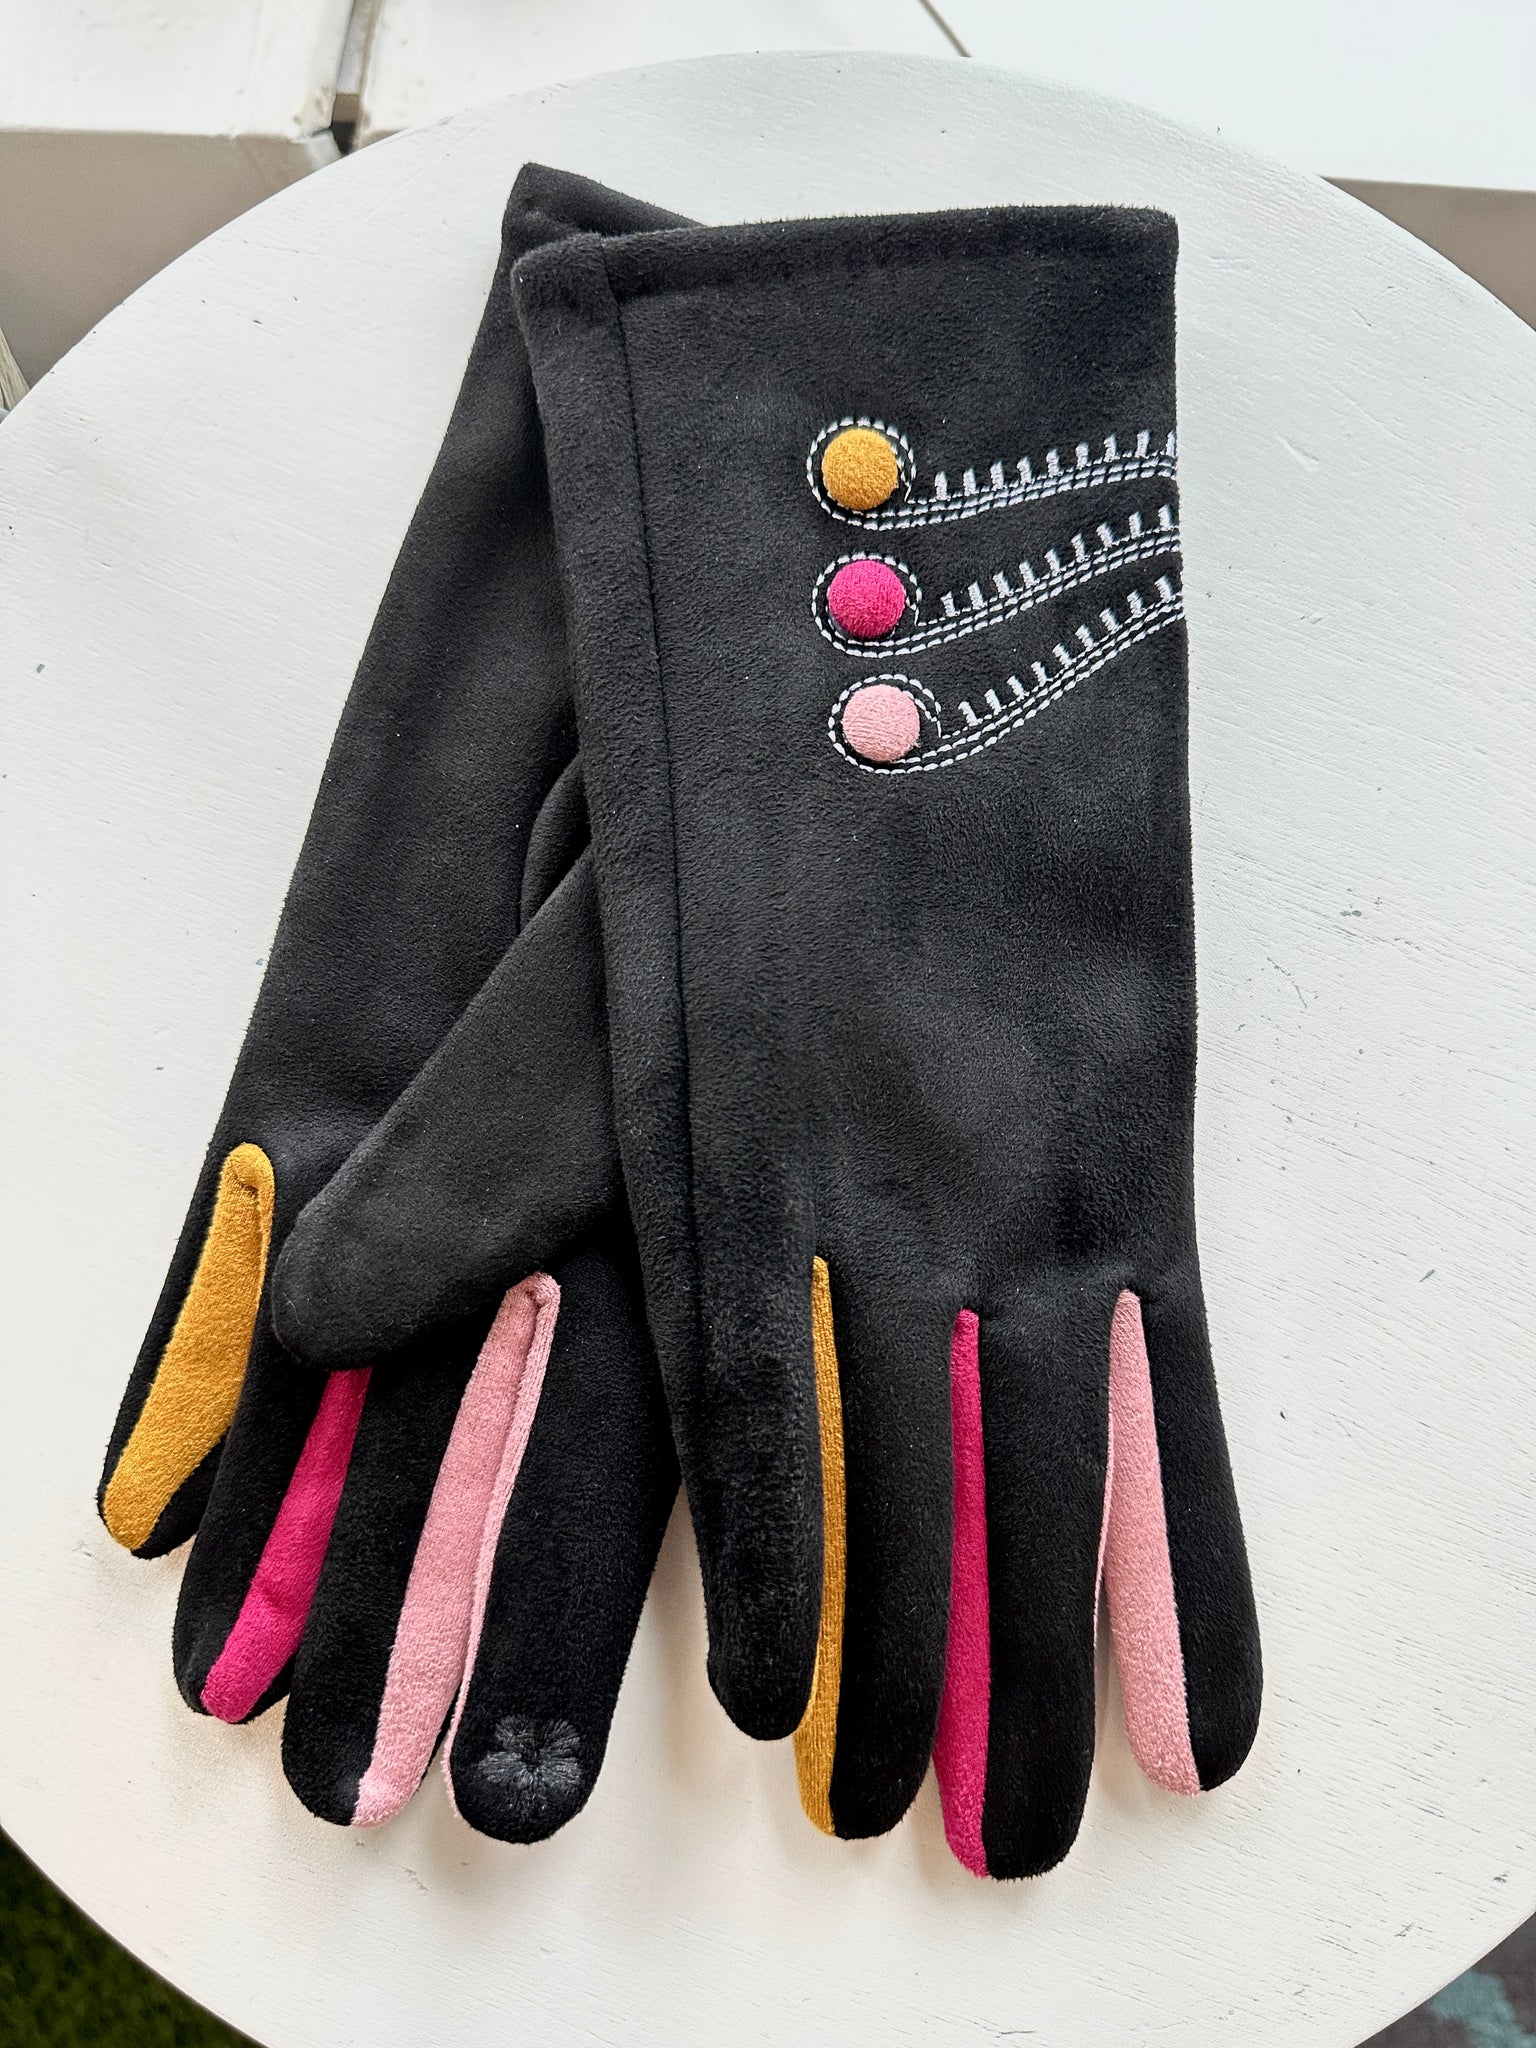 Colorful Women's Stylish Texting Gloves with Buttons Accents